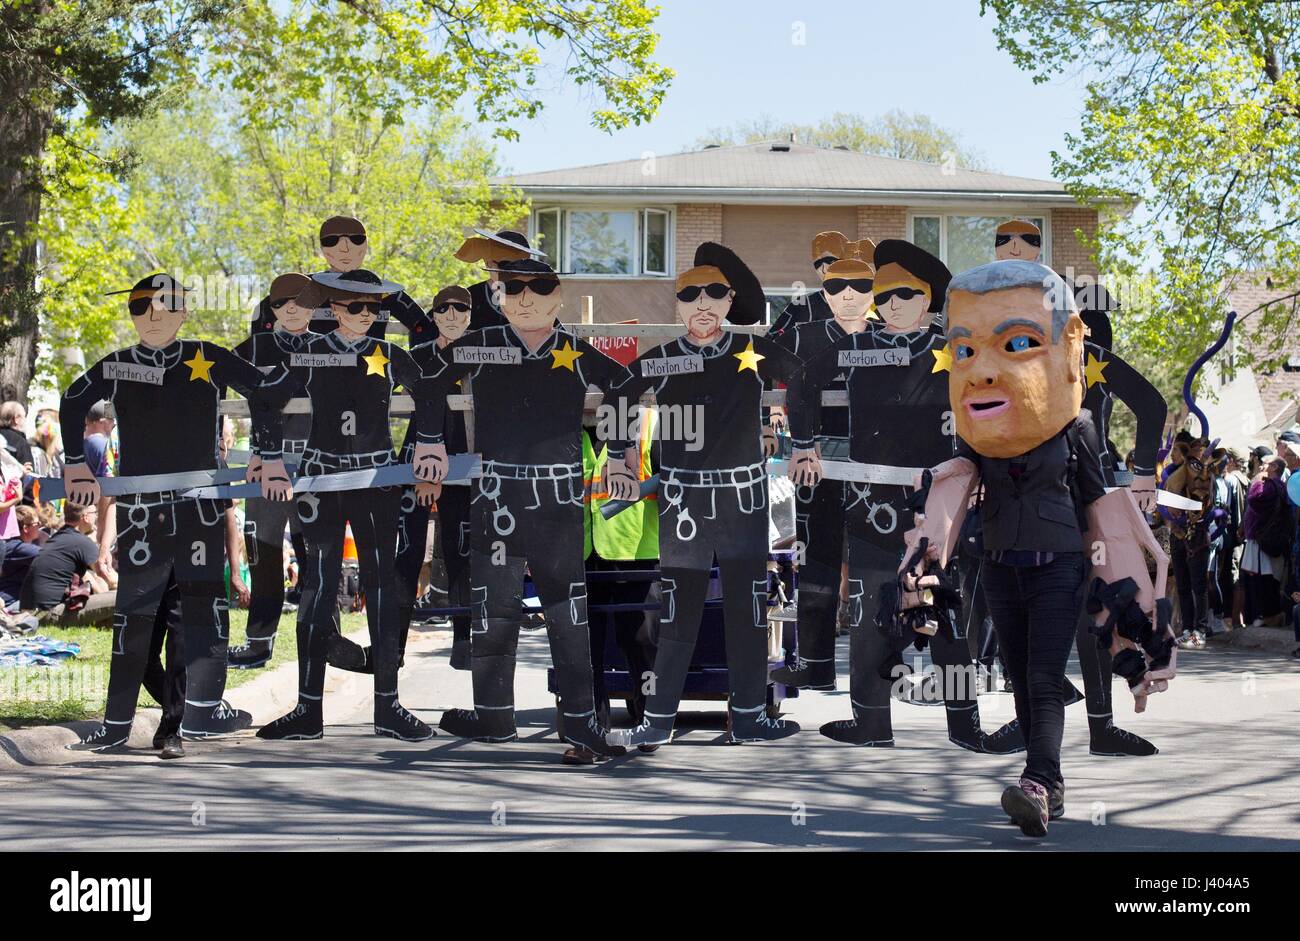 A group protesting Morton county, North Dakota law enforcement at the Mayday parade in Minneapolis, Minnesota, USA. Stock Photo